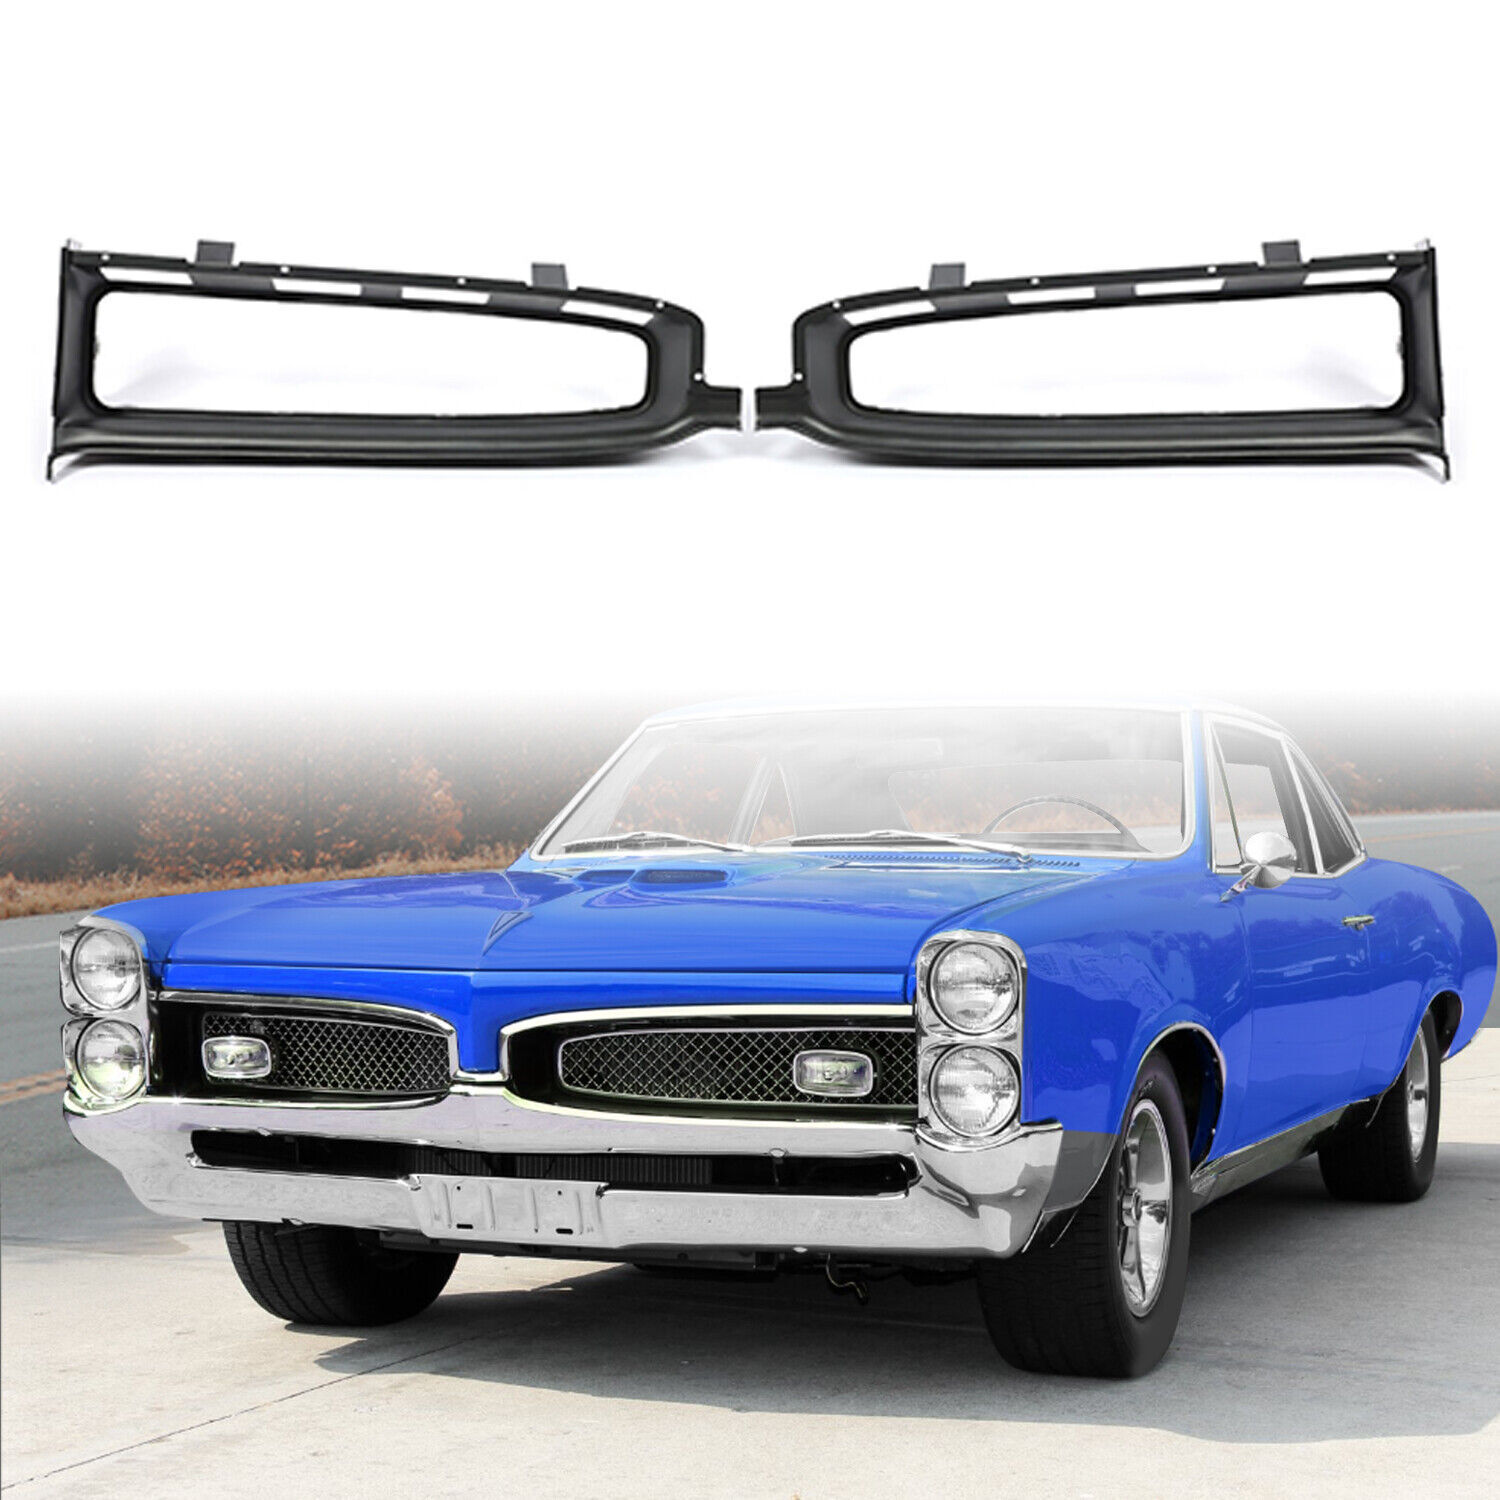 For 1967 Pontiac GTO Replace #9786207 9786208 Pair New Grille Inserts Surround